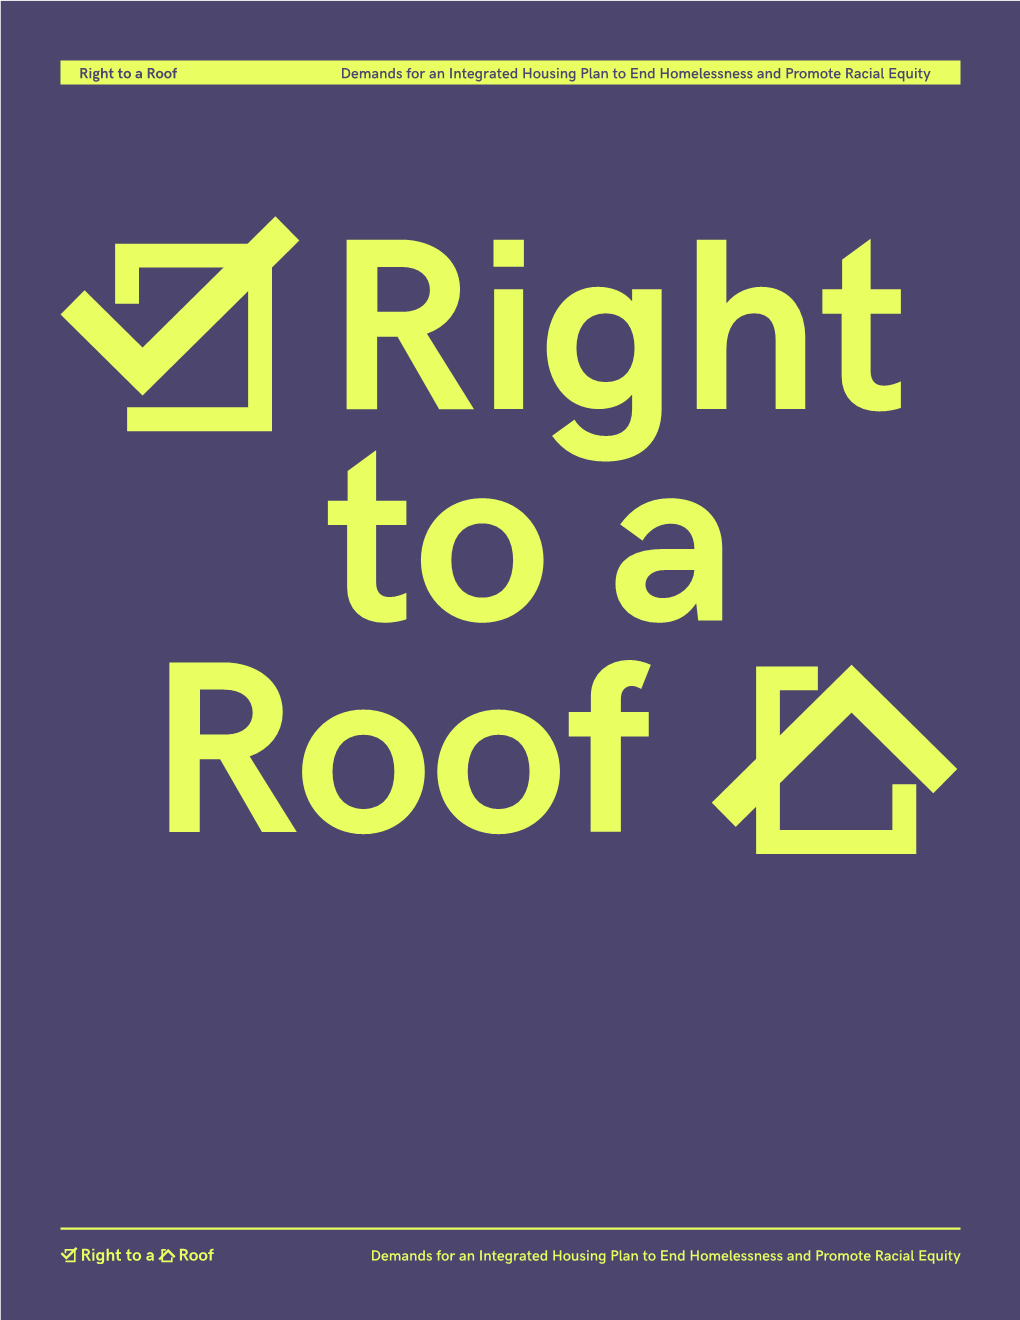 Right to a Roof: Demands for an Integrated Housing Plan to End